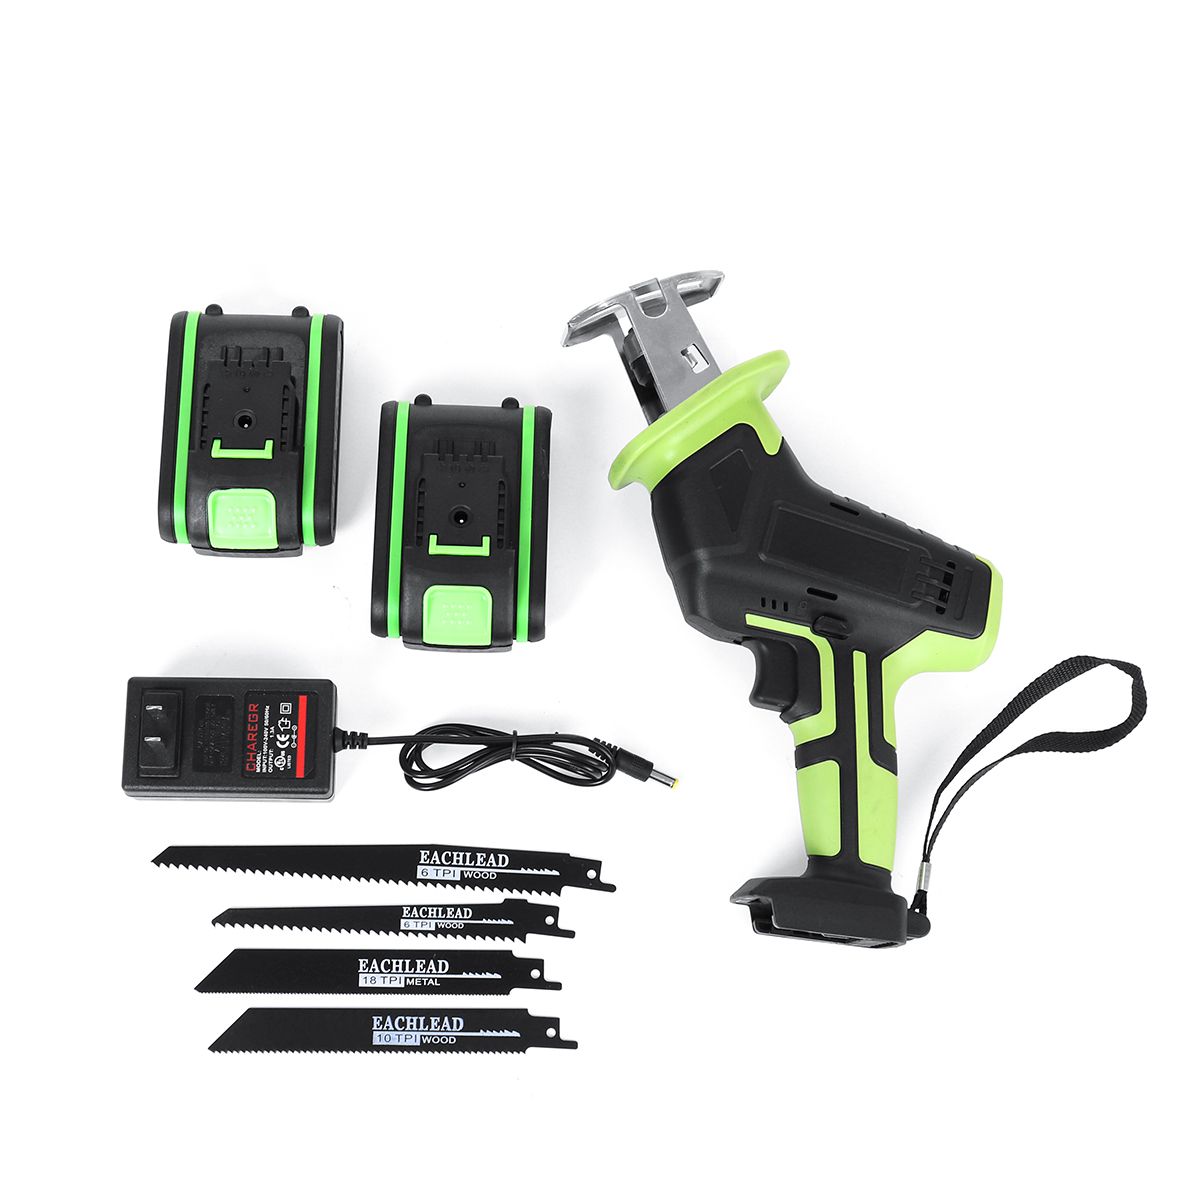 88VF-Cordless-Charging-Reciprocating-Saw-Kit-2-Battery-Modified-Wood-Cutter-Set-1670502